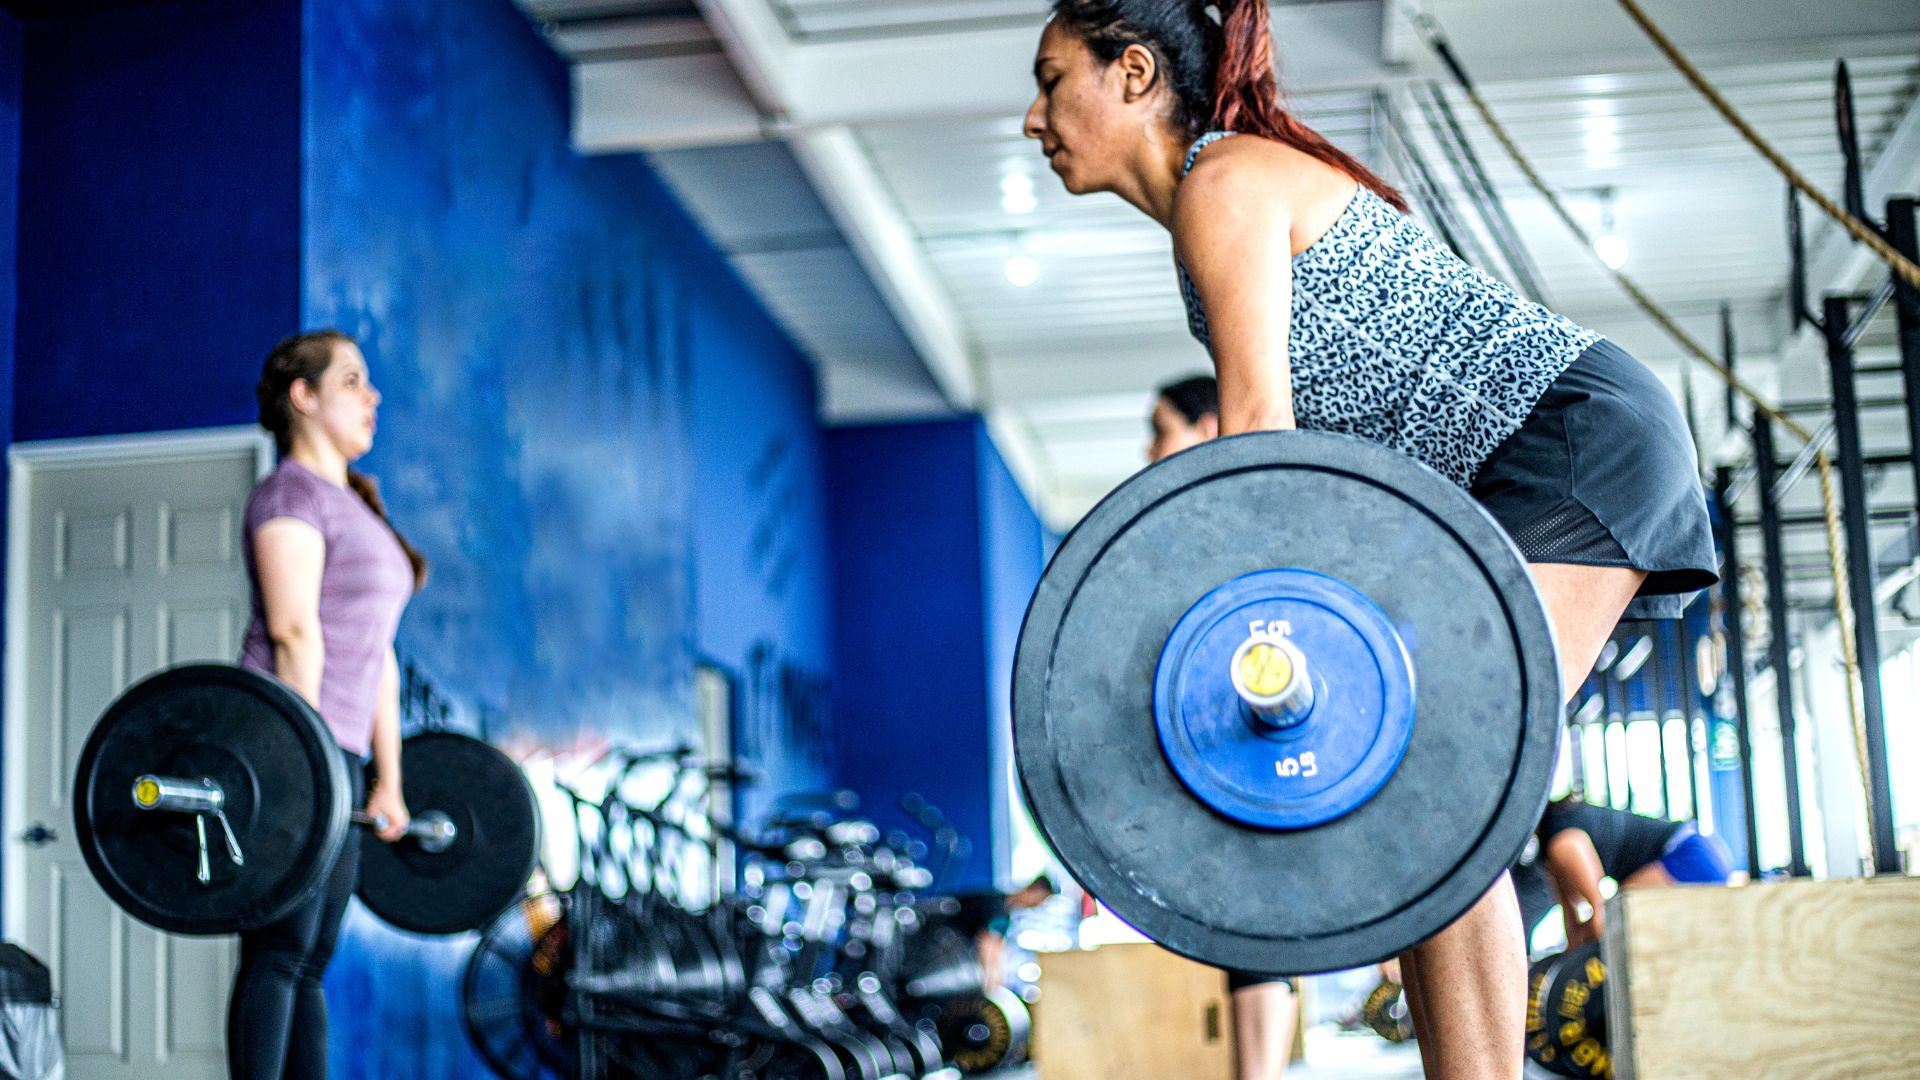 Women weightlifting at the gym. Why women should lift heavy weights. Propel Physiotherapy personal training and exercise programming.